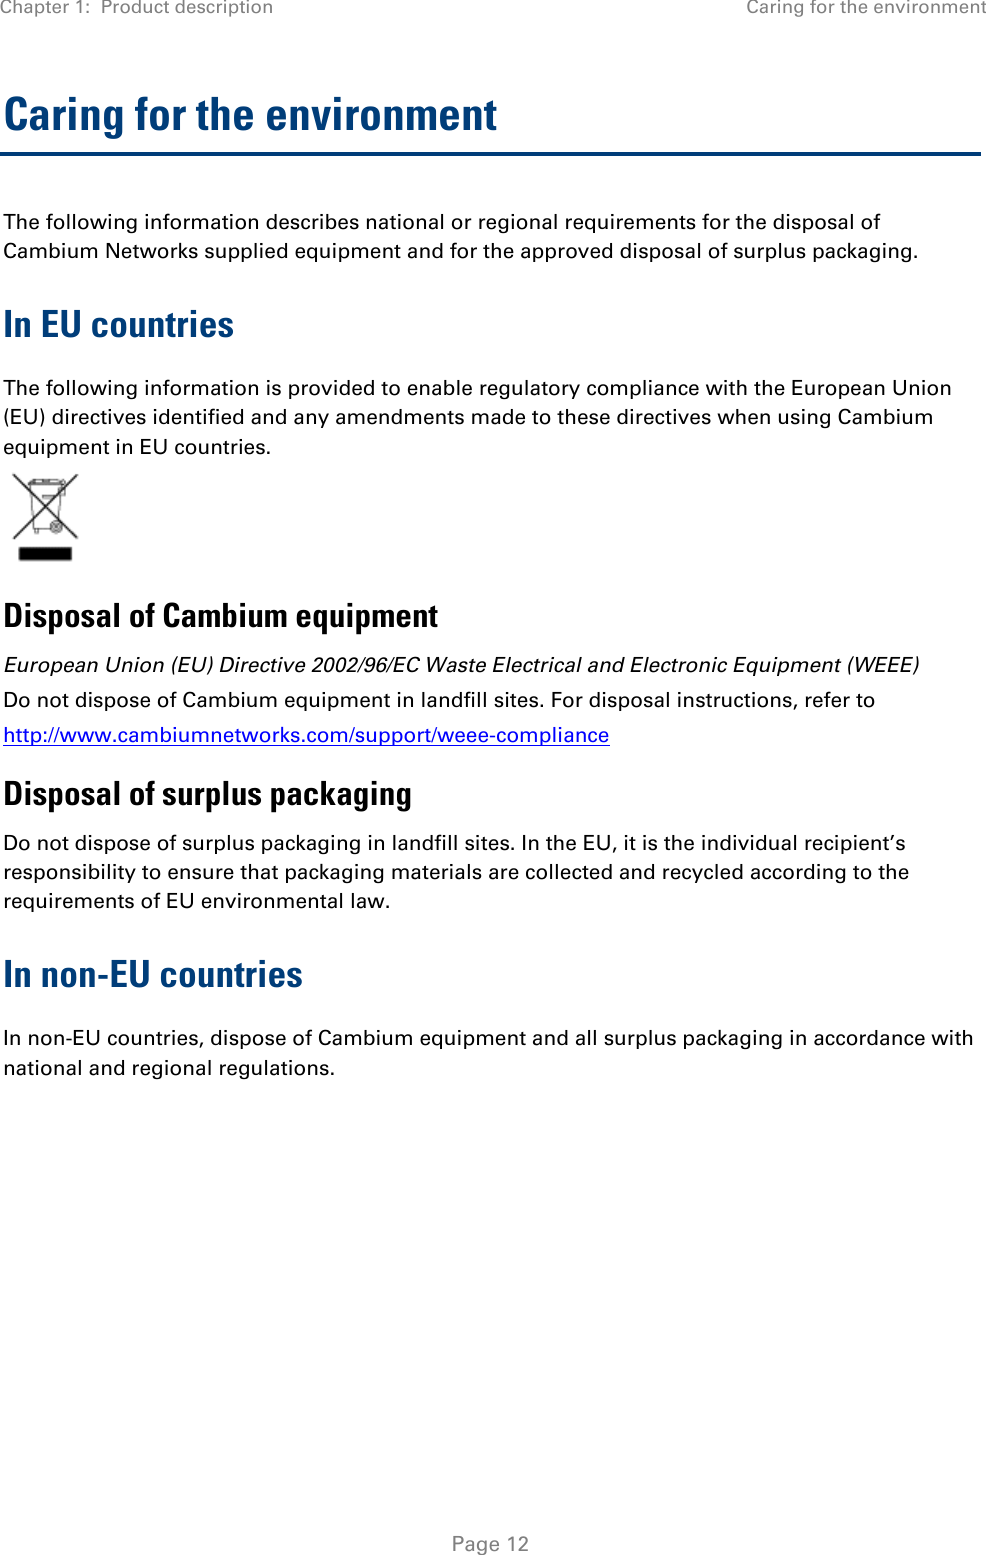 Chapter 1:  Product description  Caring for the environment   Page 12 Caring for the environment The following information describes national or regional requirements for the disposal of Cambium Networks supplied equipment and for the approved disposal of surplus packaging. In EU countries The following information is provided to enable regulatory compliance with the European Union (EU) directives identified and any amendments made to these directives when using Cambium equipment in EU countries.  Disposal of Cambium equipment European Union (EU) Directive 2002/96/EC Waste Electrical and Electronic Equipment (WEEE) Do not dispose of Cambium equipment in landfill sites. For disposal instructions, refer to  http://www.cambiumnetworks.com/support/weee-compliance Disposal of surplus packaging Do not dispose of surplus packaging in landfill sites. In the EU, it is the individual recipient’s responsibility to ensure that packaging materials are collected and recycled according to the requirements of EU environmental law. In non-EU countries In non-EU countries, dispose of Cambium equipment and all surplus packaging in accordance with national and regional regulations.  